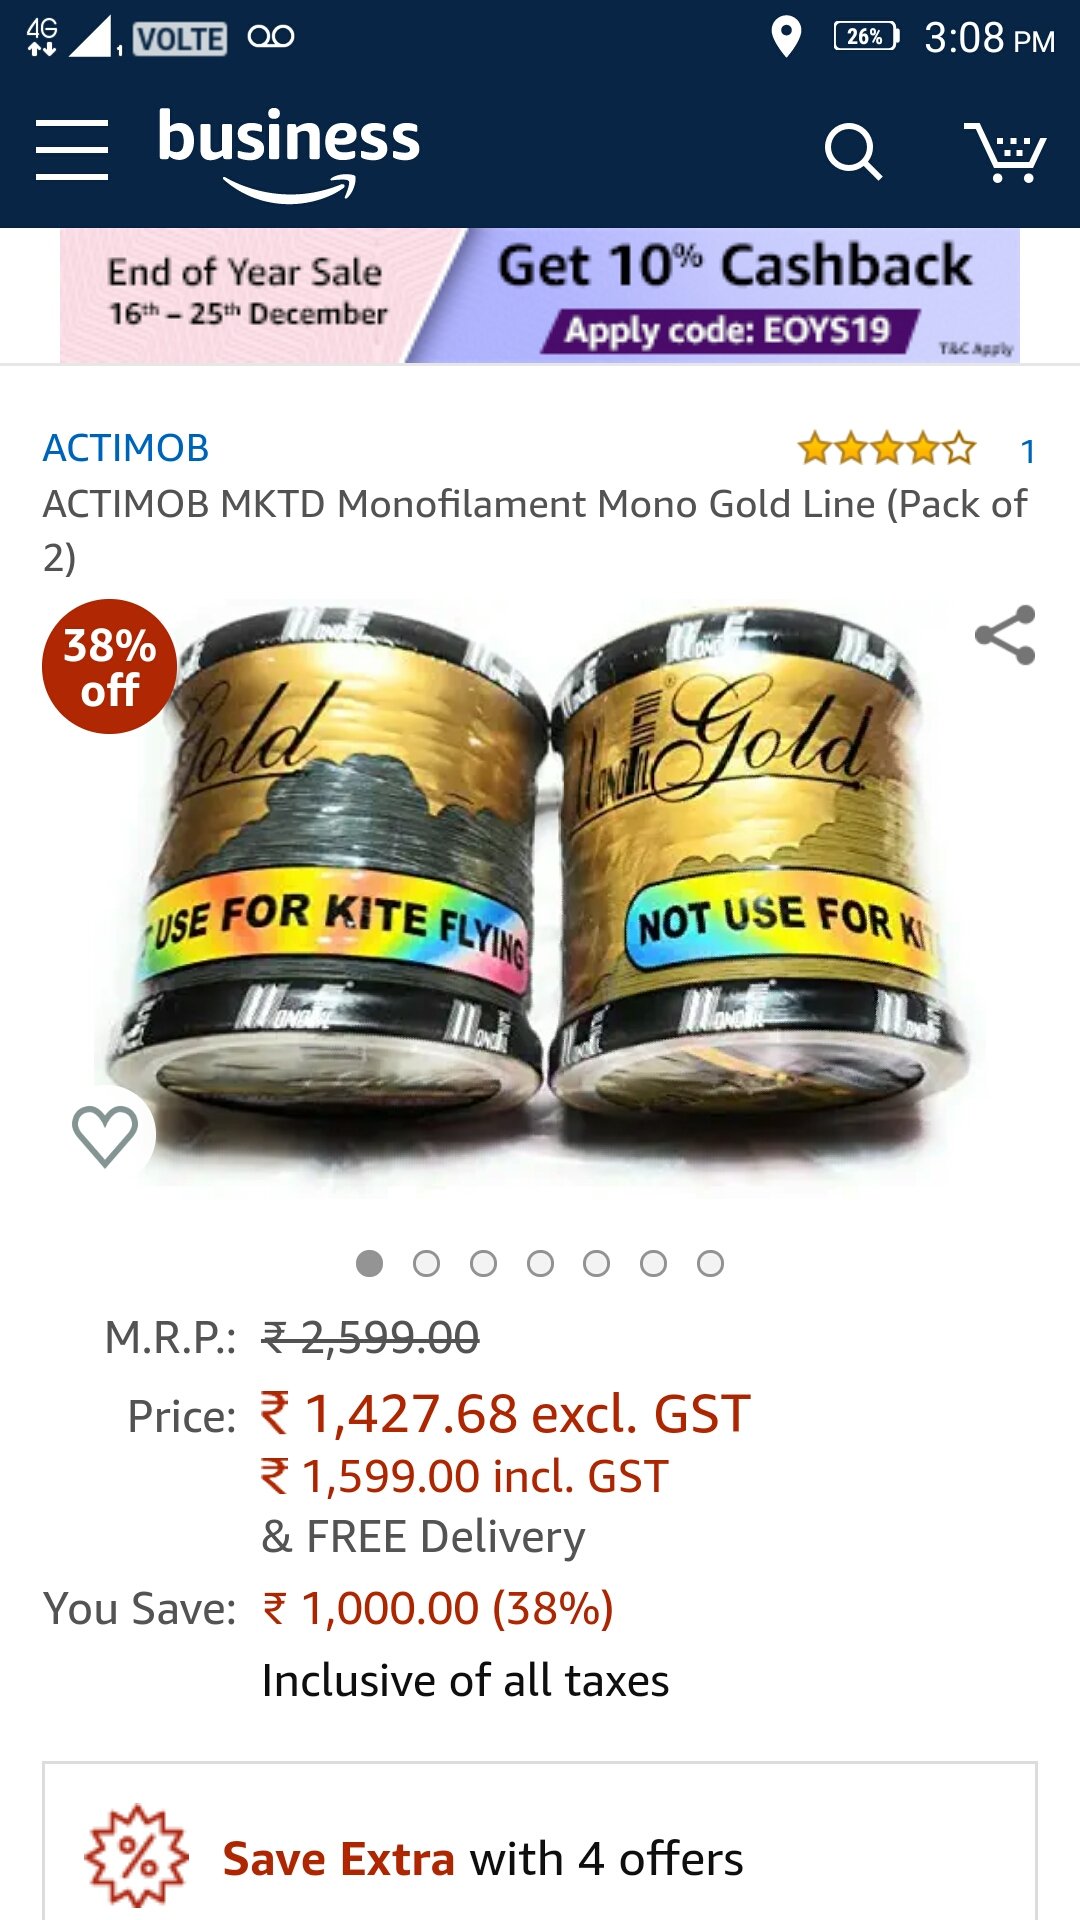 ACTIMOB MKTD Monofilament Mono Gold Fishing Line (Pack of 2) - Price History